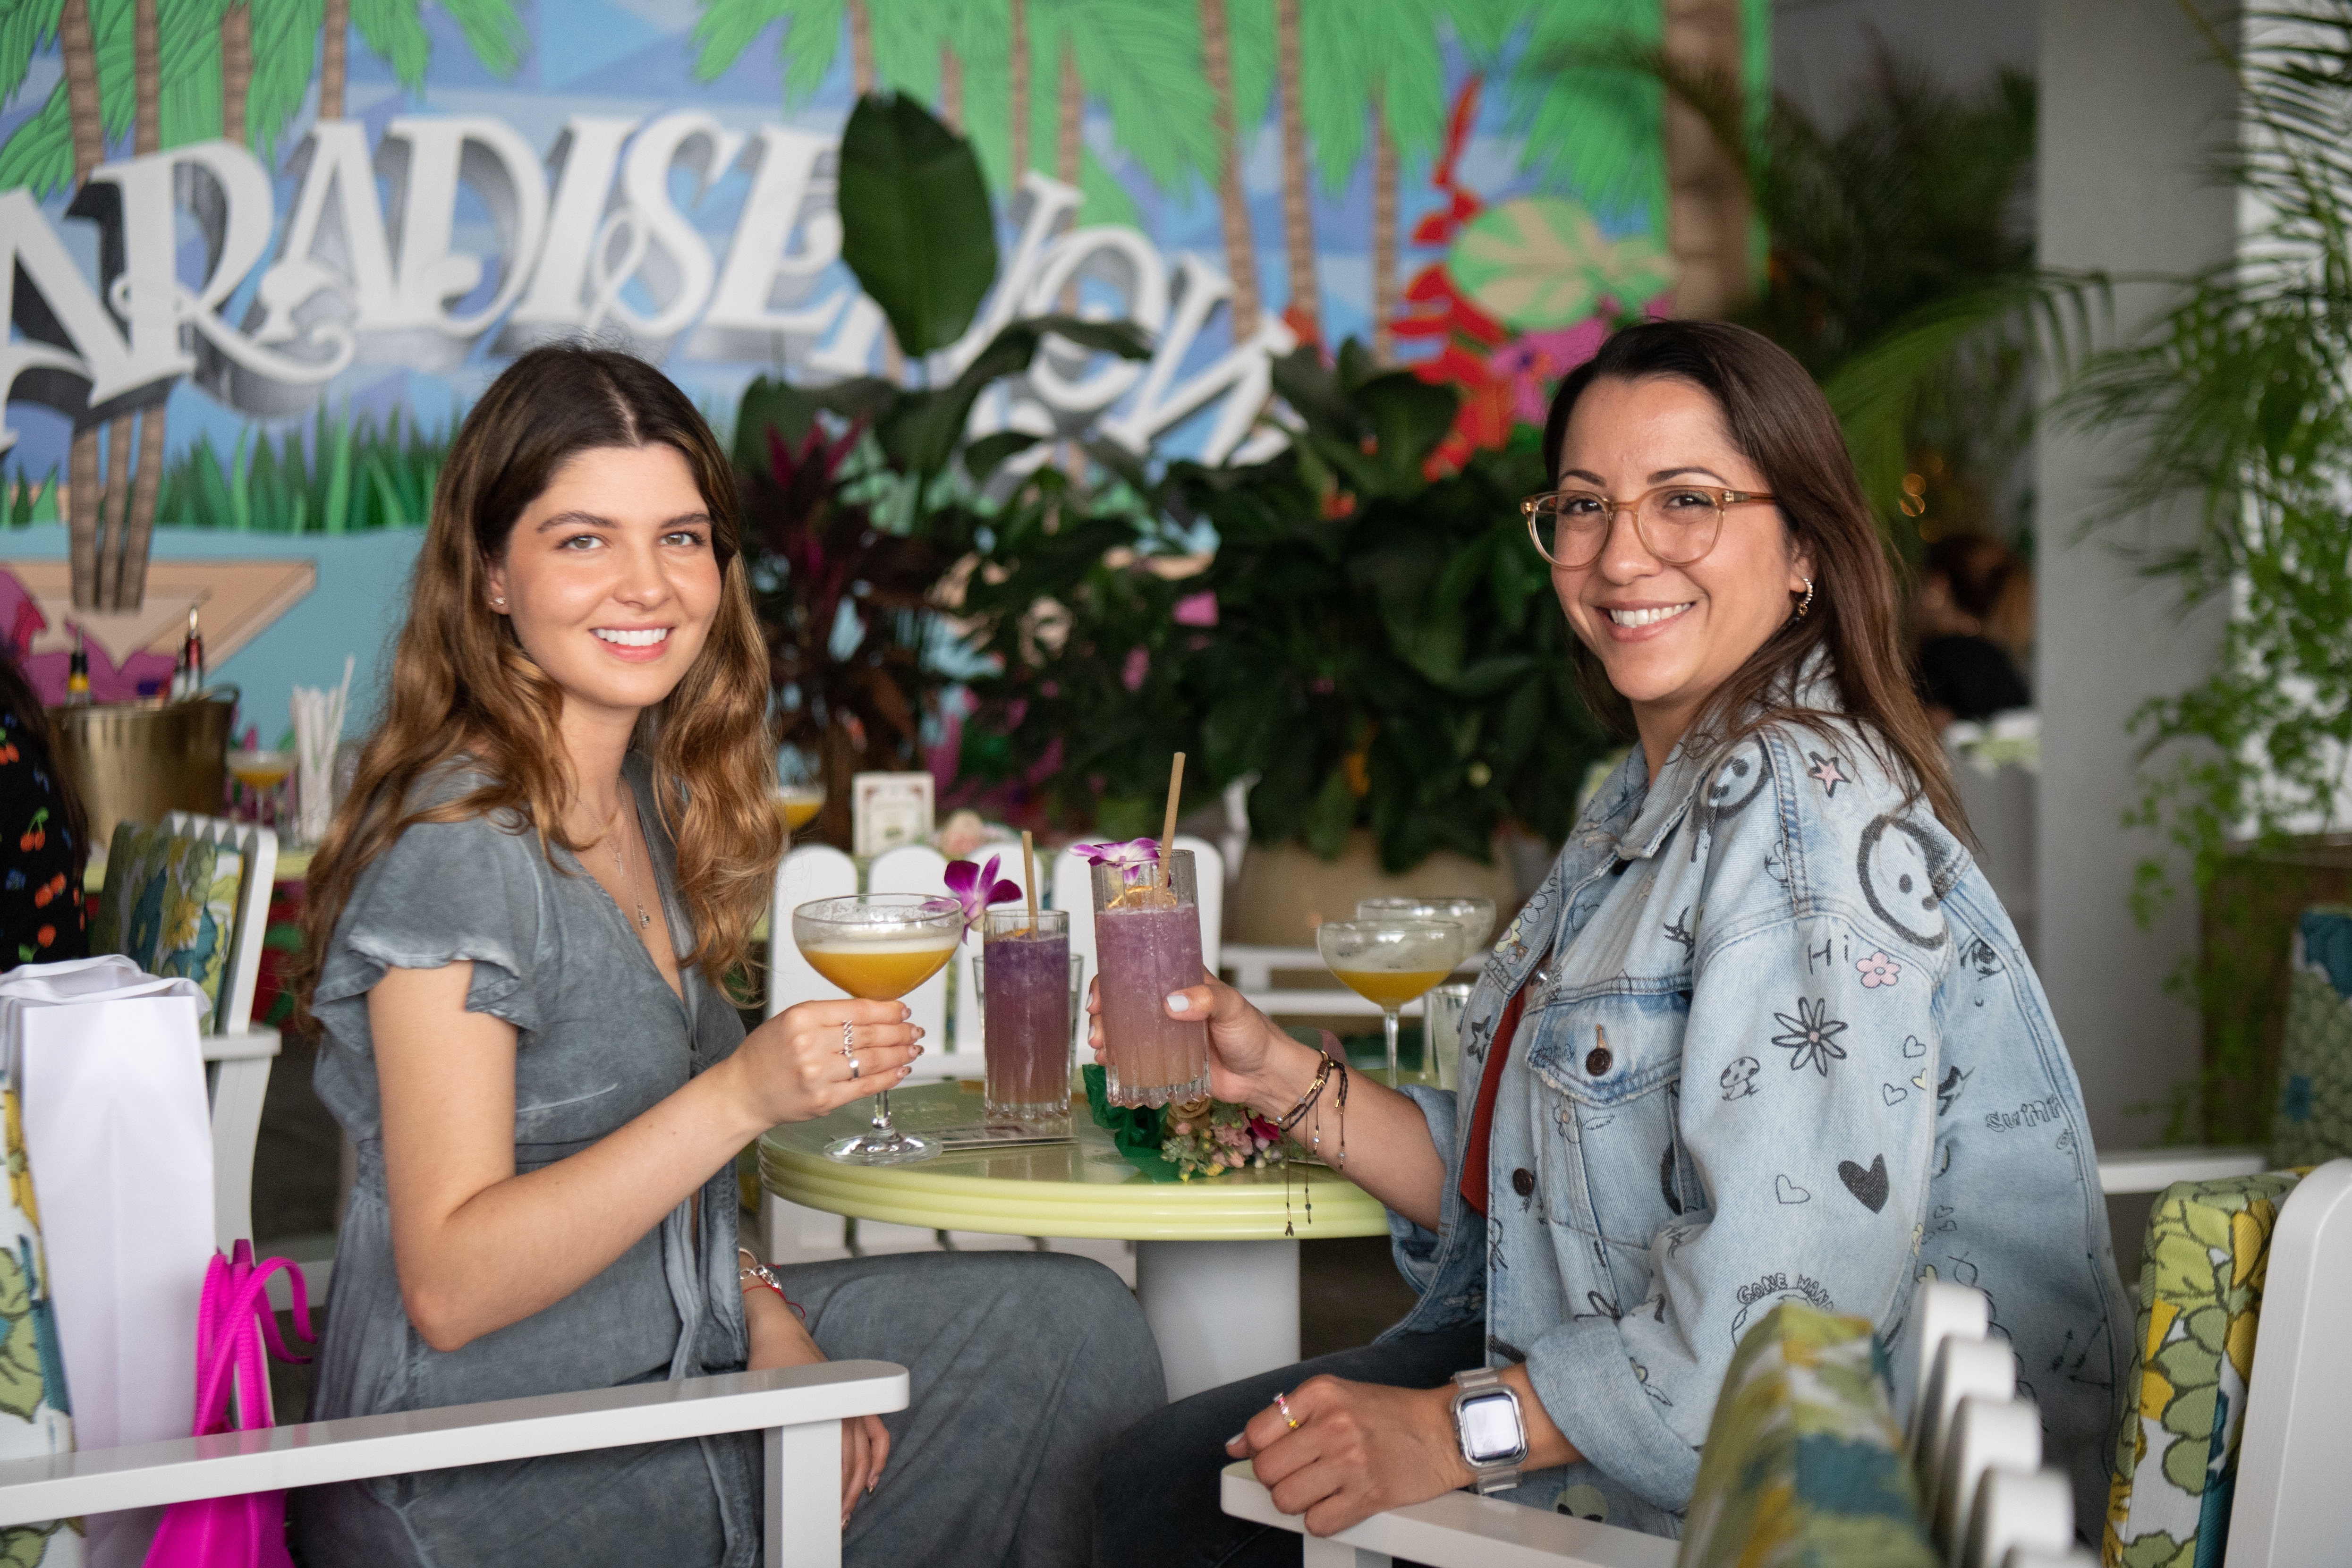 Two women hold up cocktails and smile for a photo